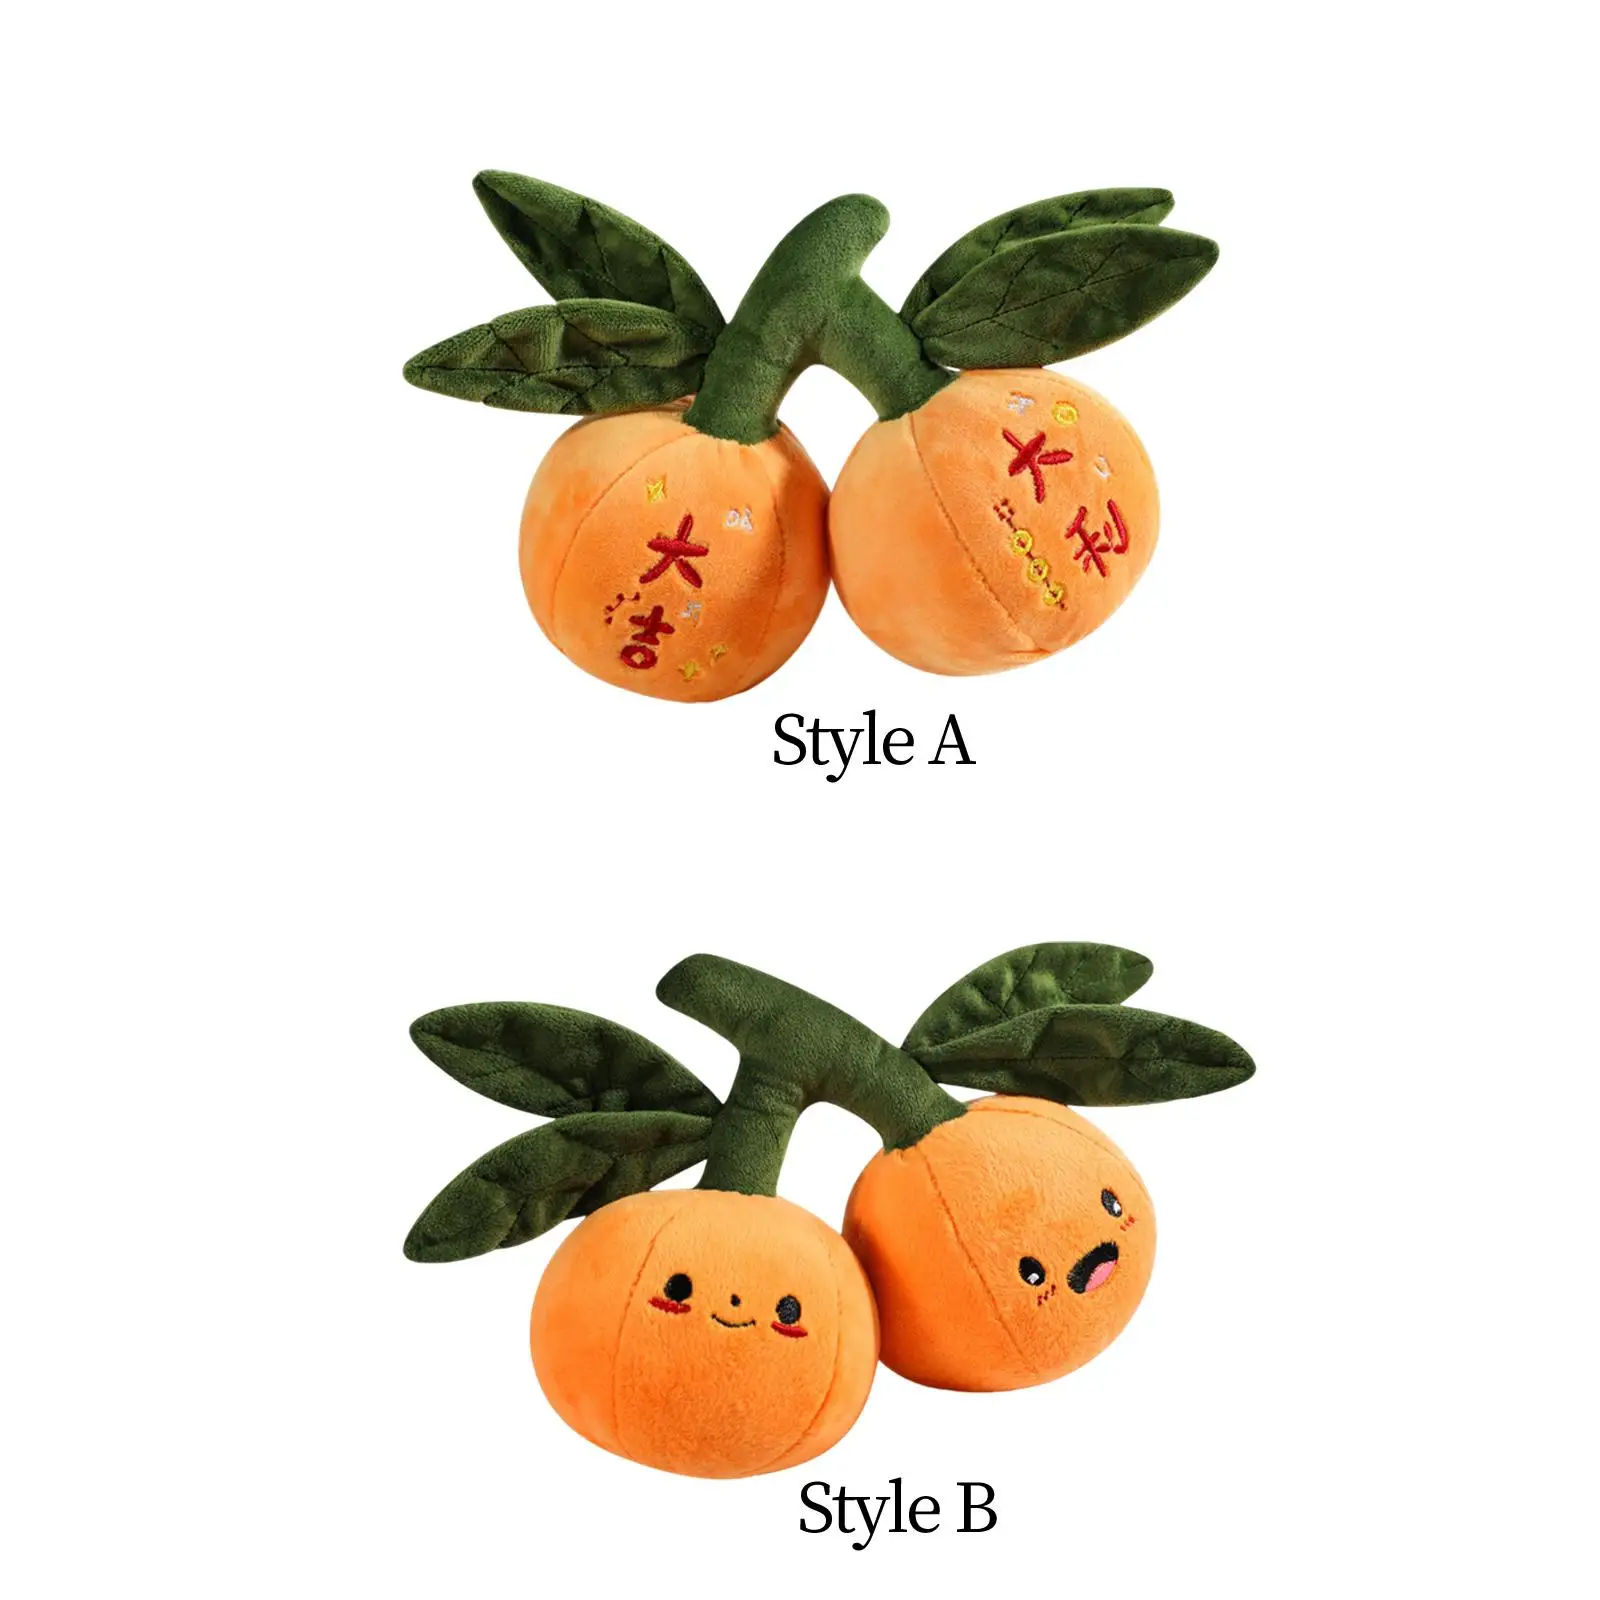 Stuffed Tangerine Toys Kids Birthday Gifts for Bedroom Home Decorative